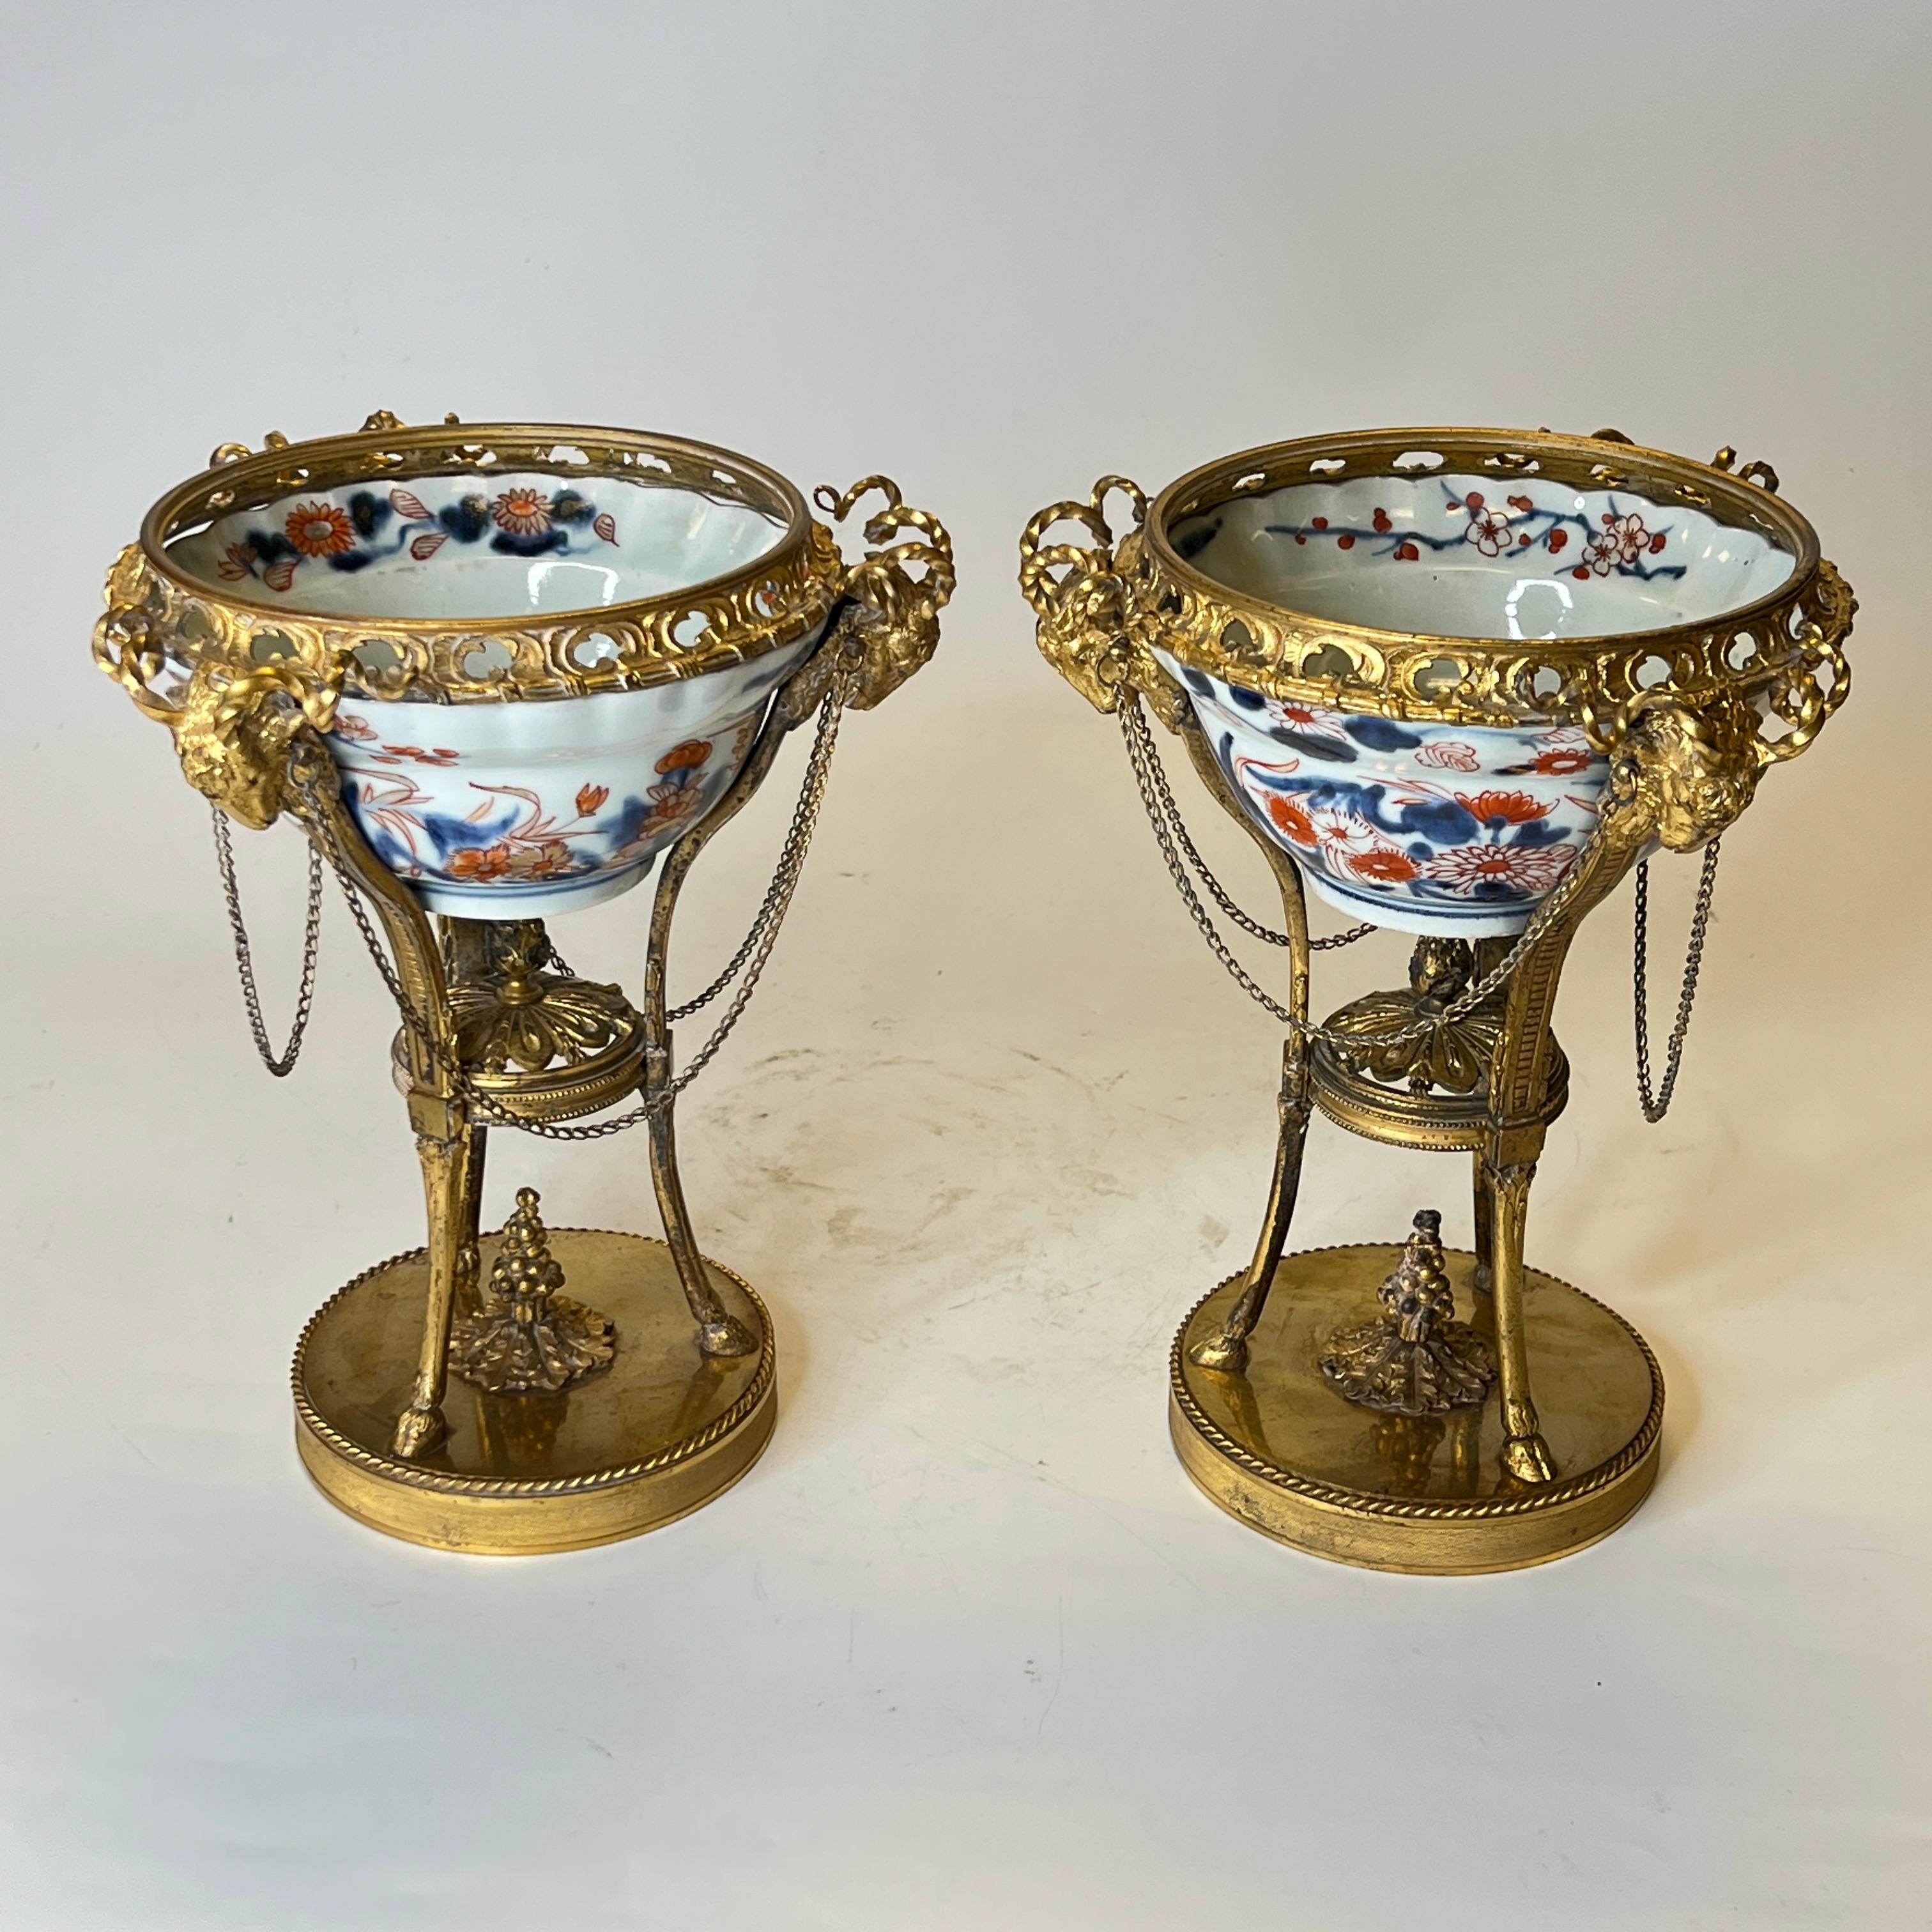 Pair early 19th century Chinese Imari porcelain bowls with ormolu bronze torchiere-form stands in Louis XVI Style.